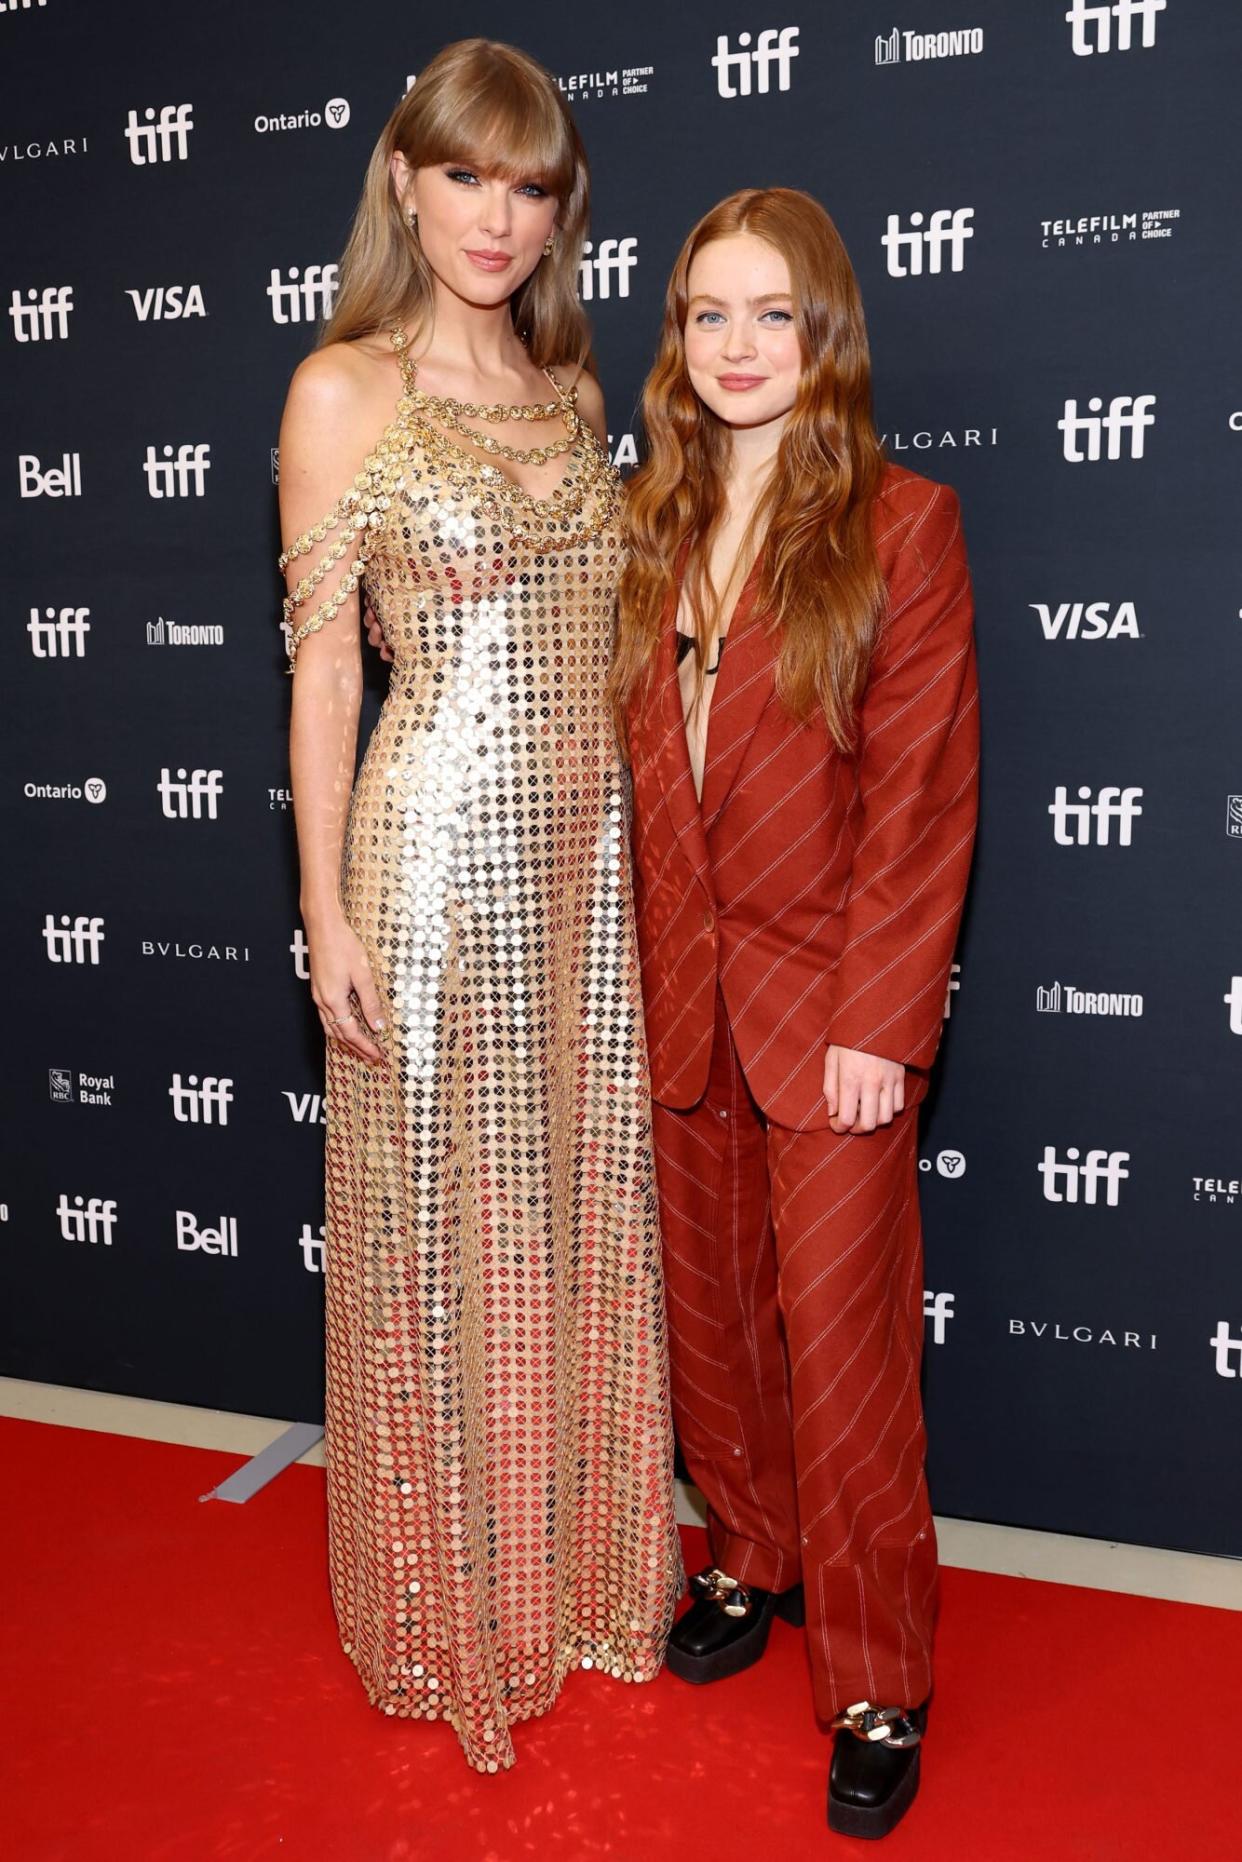 TORONTO, ONTARIO - SEPTEMBER 09: (L-R) Taylor Swift and Sadie Sink attend 'In Conversation With... Taylor Swift' during the 2022 Toronto International Film Festival at TIFF Bell Lightbox on September 09, 2022 in Toronto, Ontario. (Photo by Amy Sussman/Getty Images)